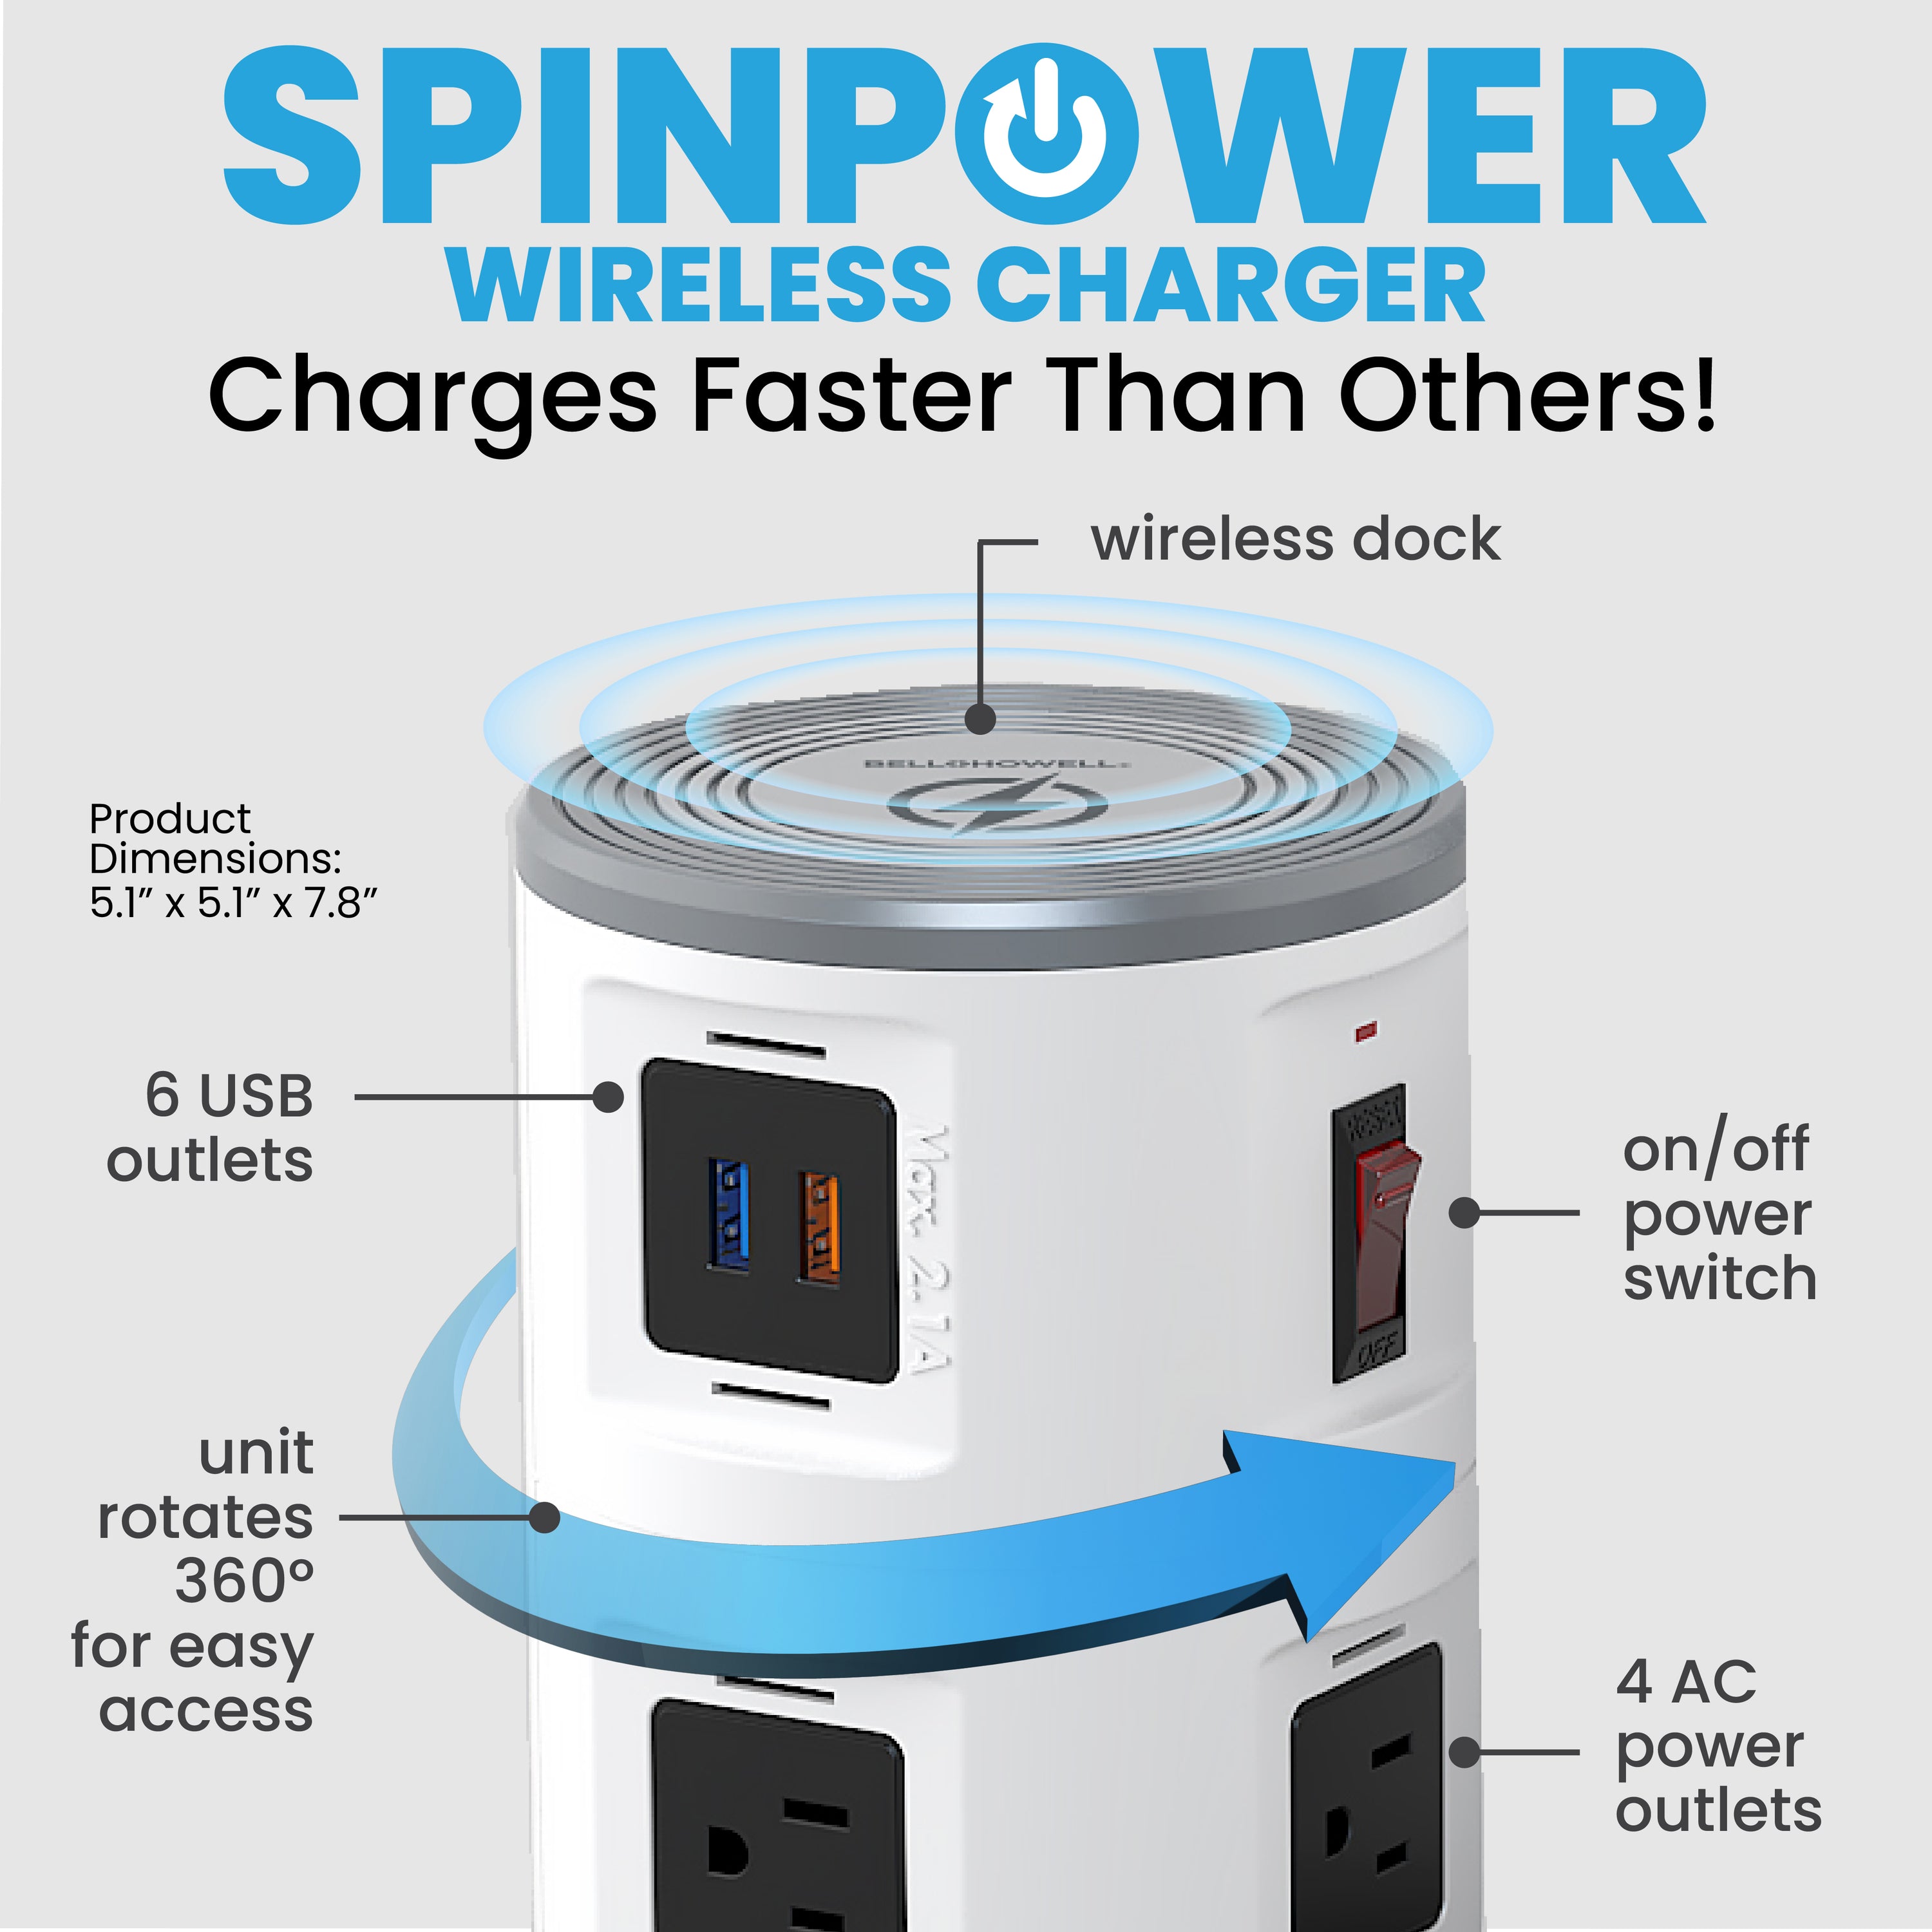 Bell + Howell Spin Power with Wireless Phone Charger